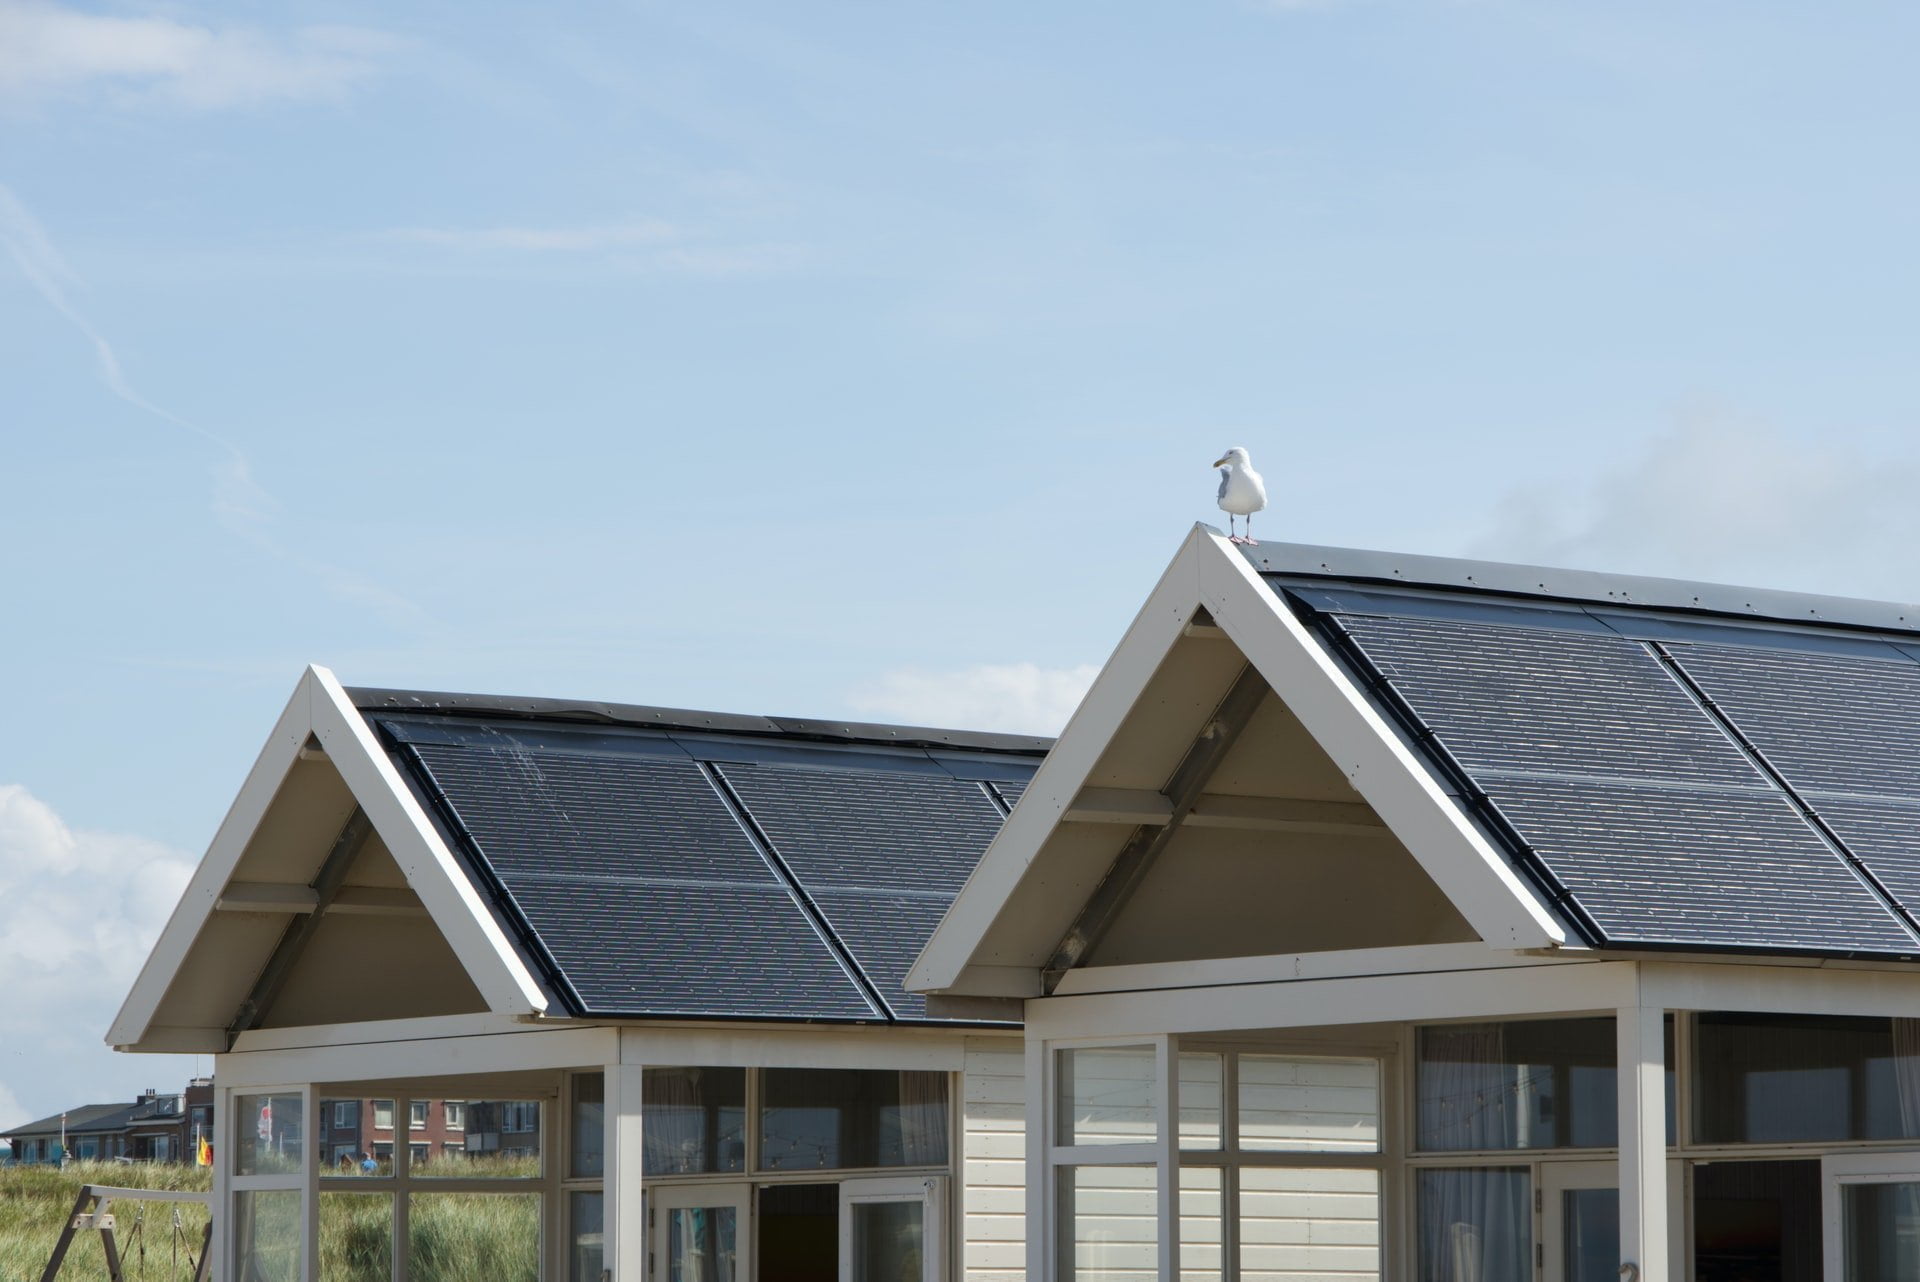 Eco-Friendly Rental Property: Rooftop solar panels on two houses